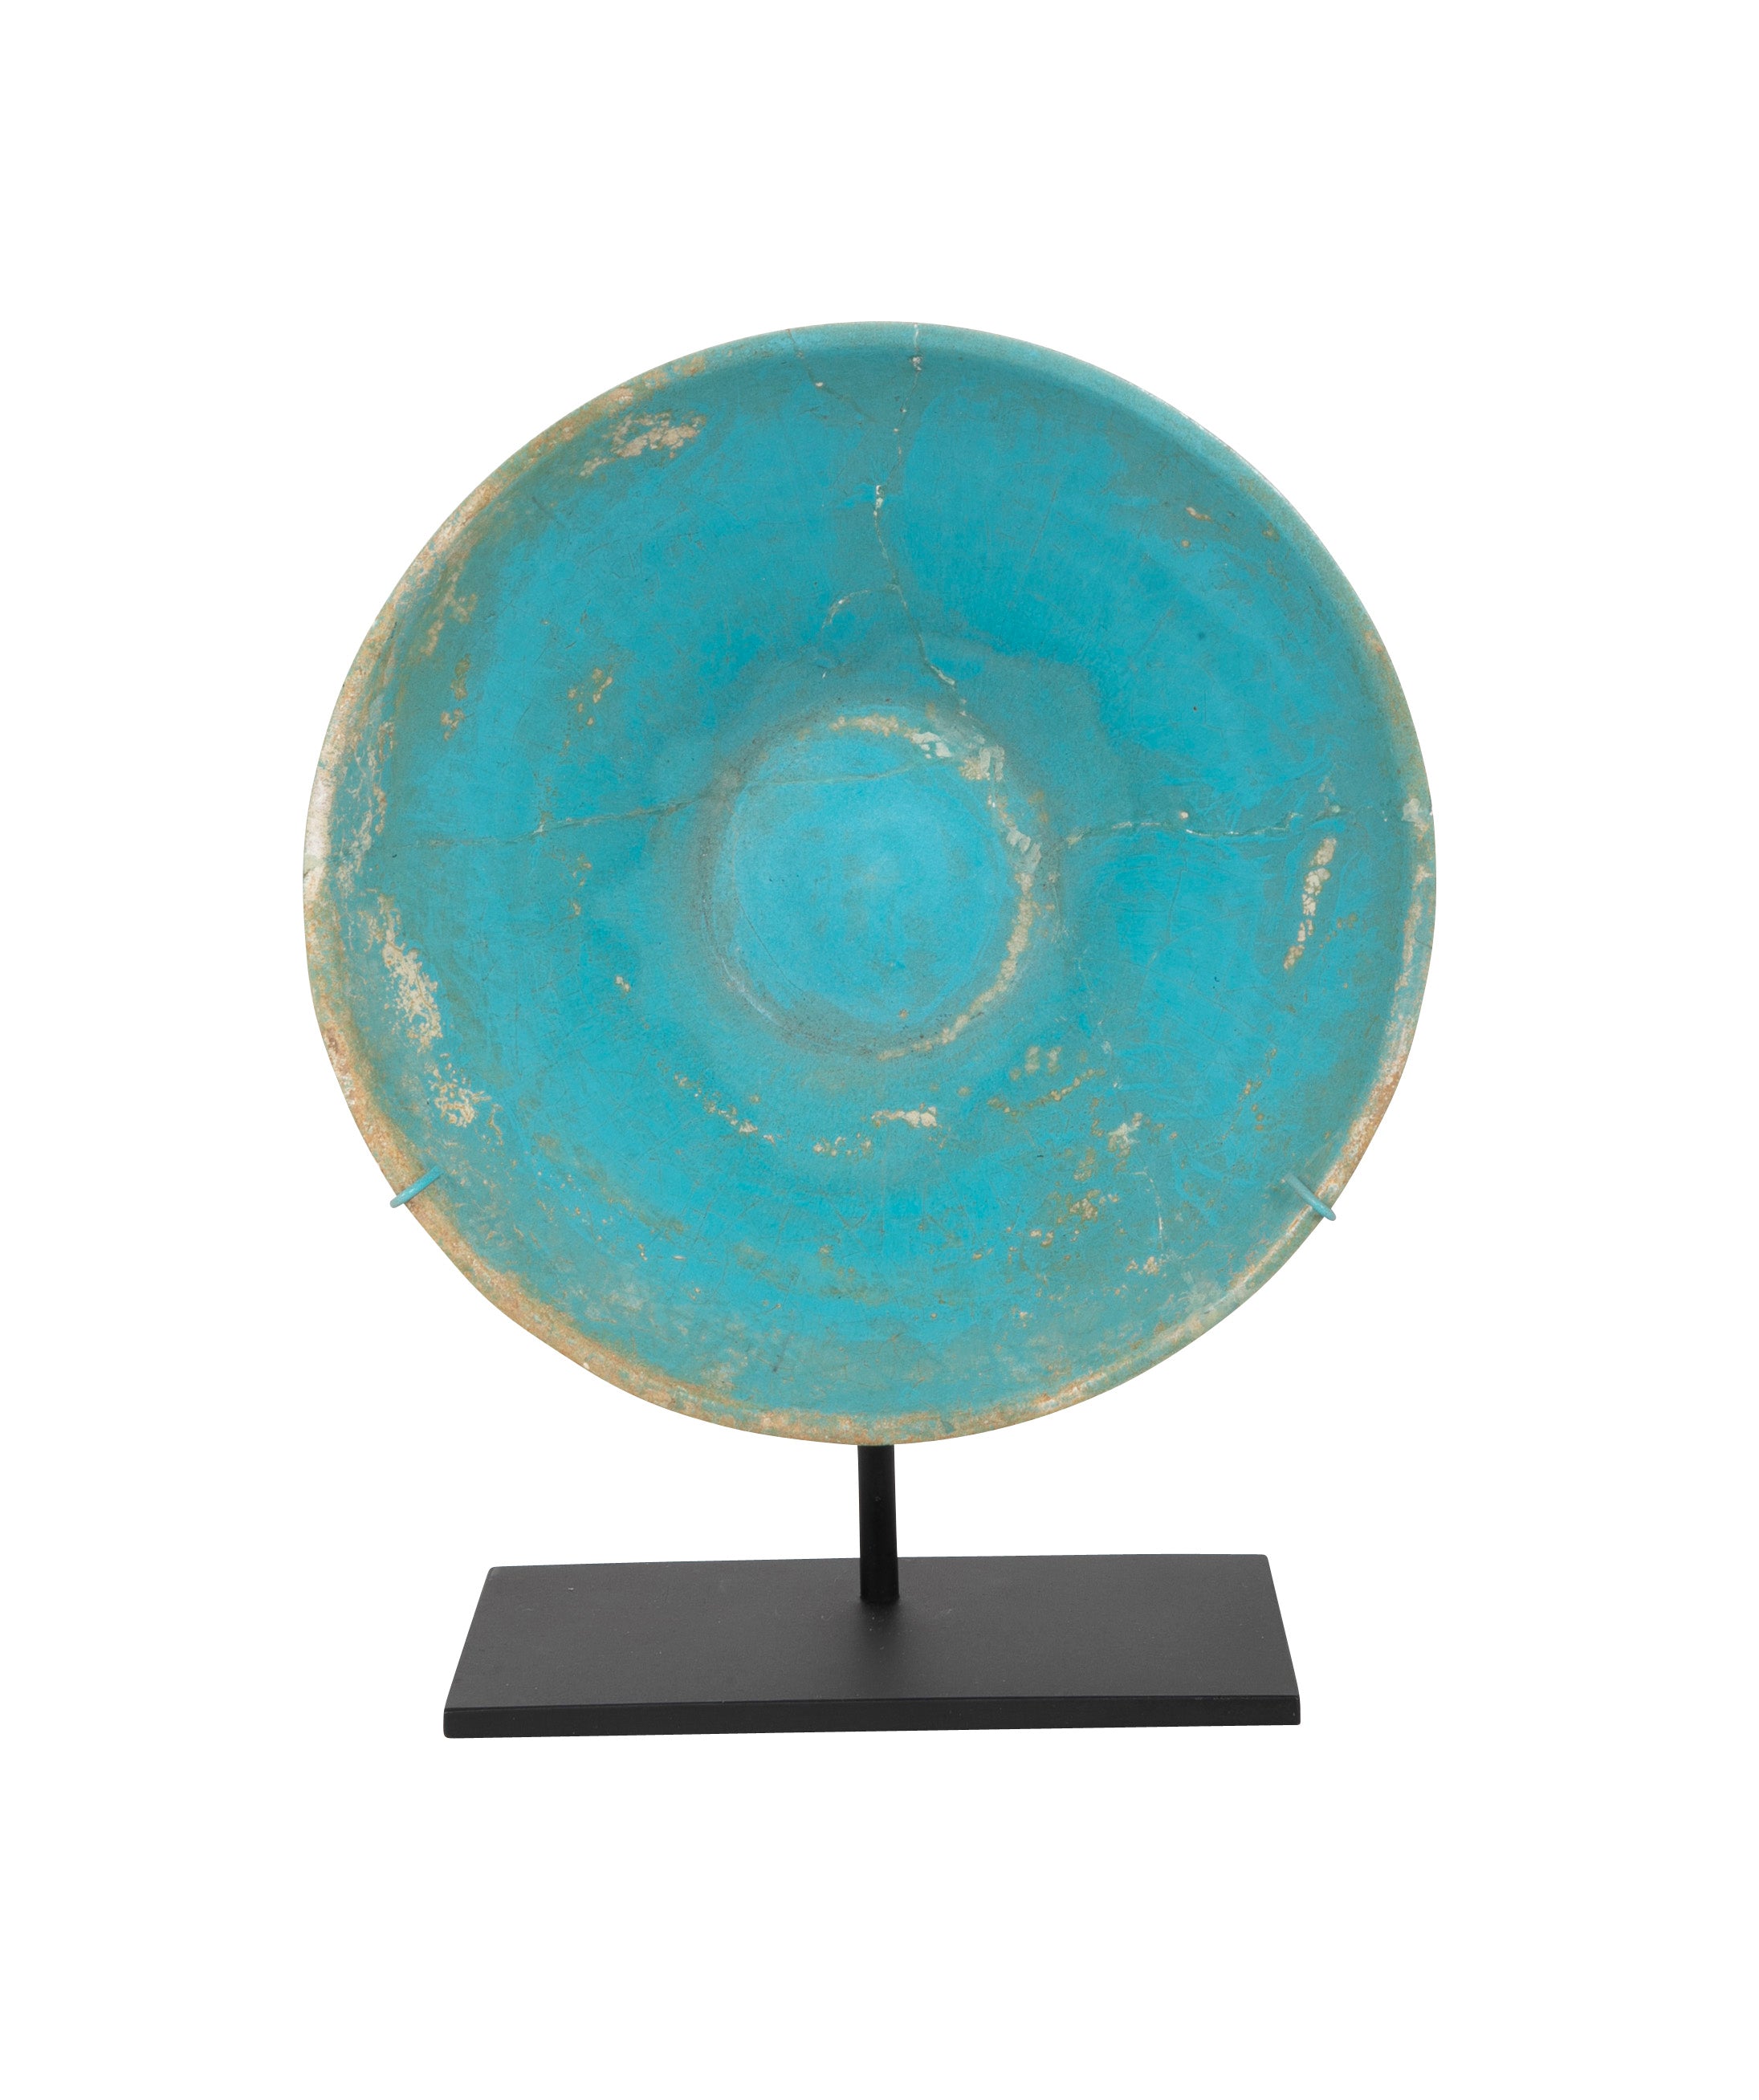 Turquoise Glazed Footed Bowl